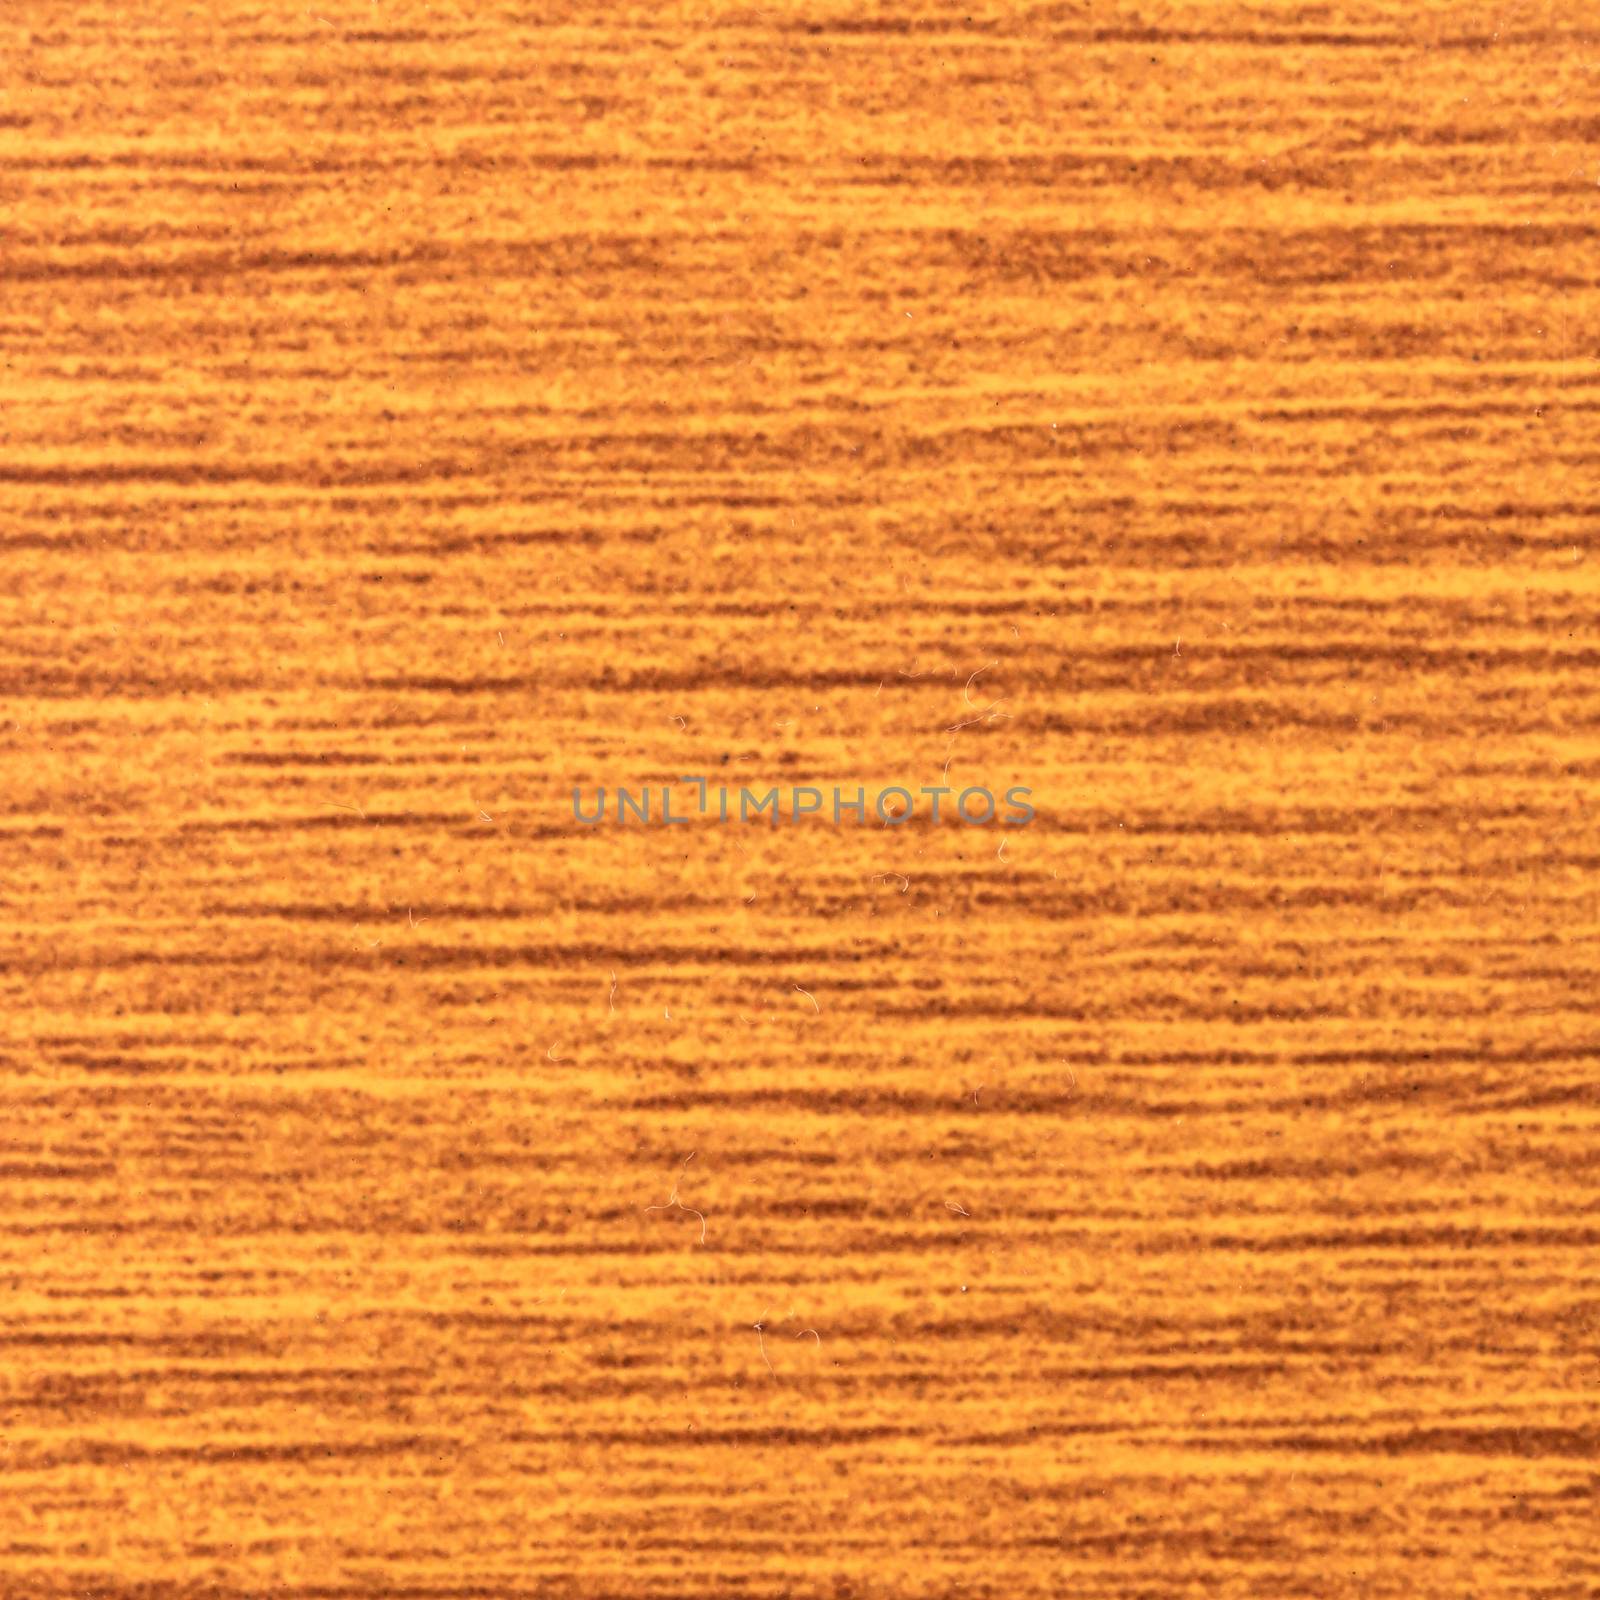 Abstract wood texture with focus on the wood's grain. Teak wood